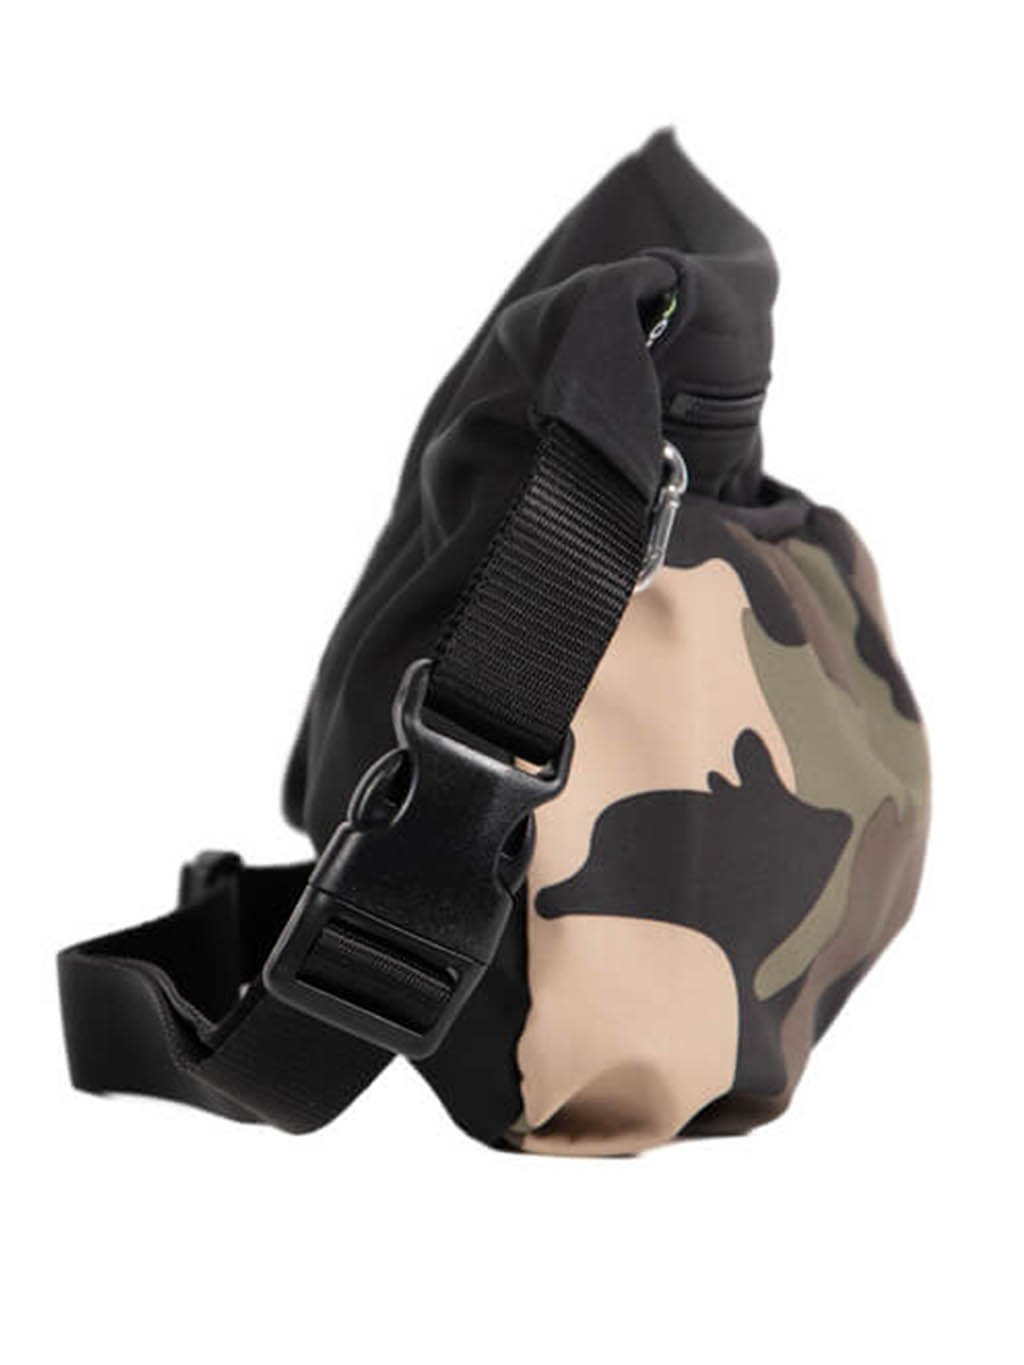 Dog training treat pouch XL camouflage